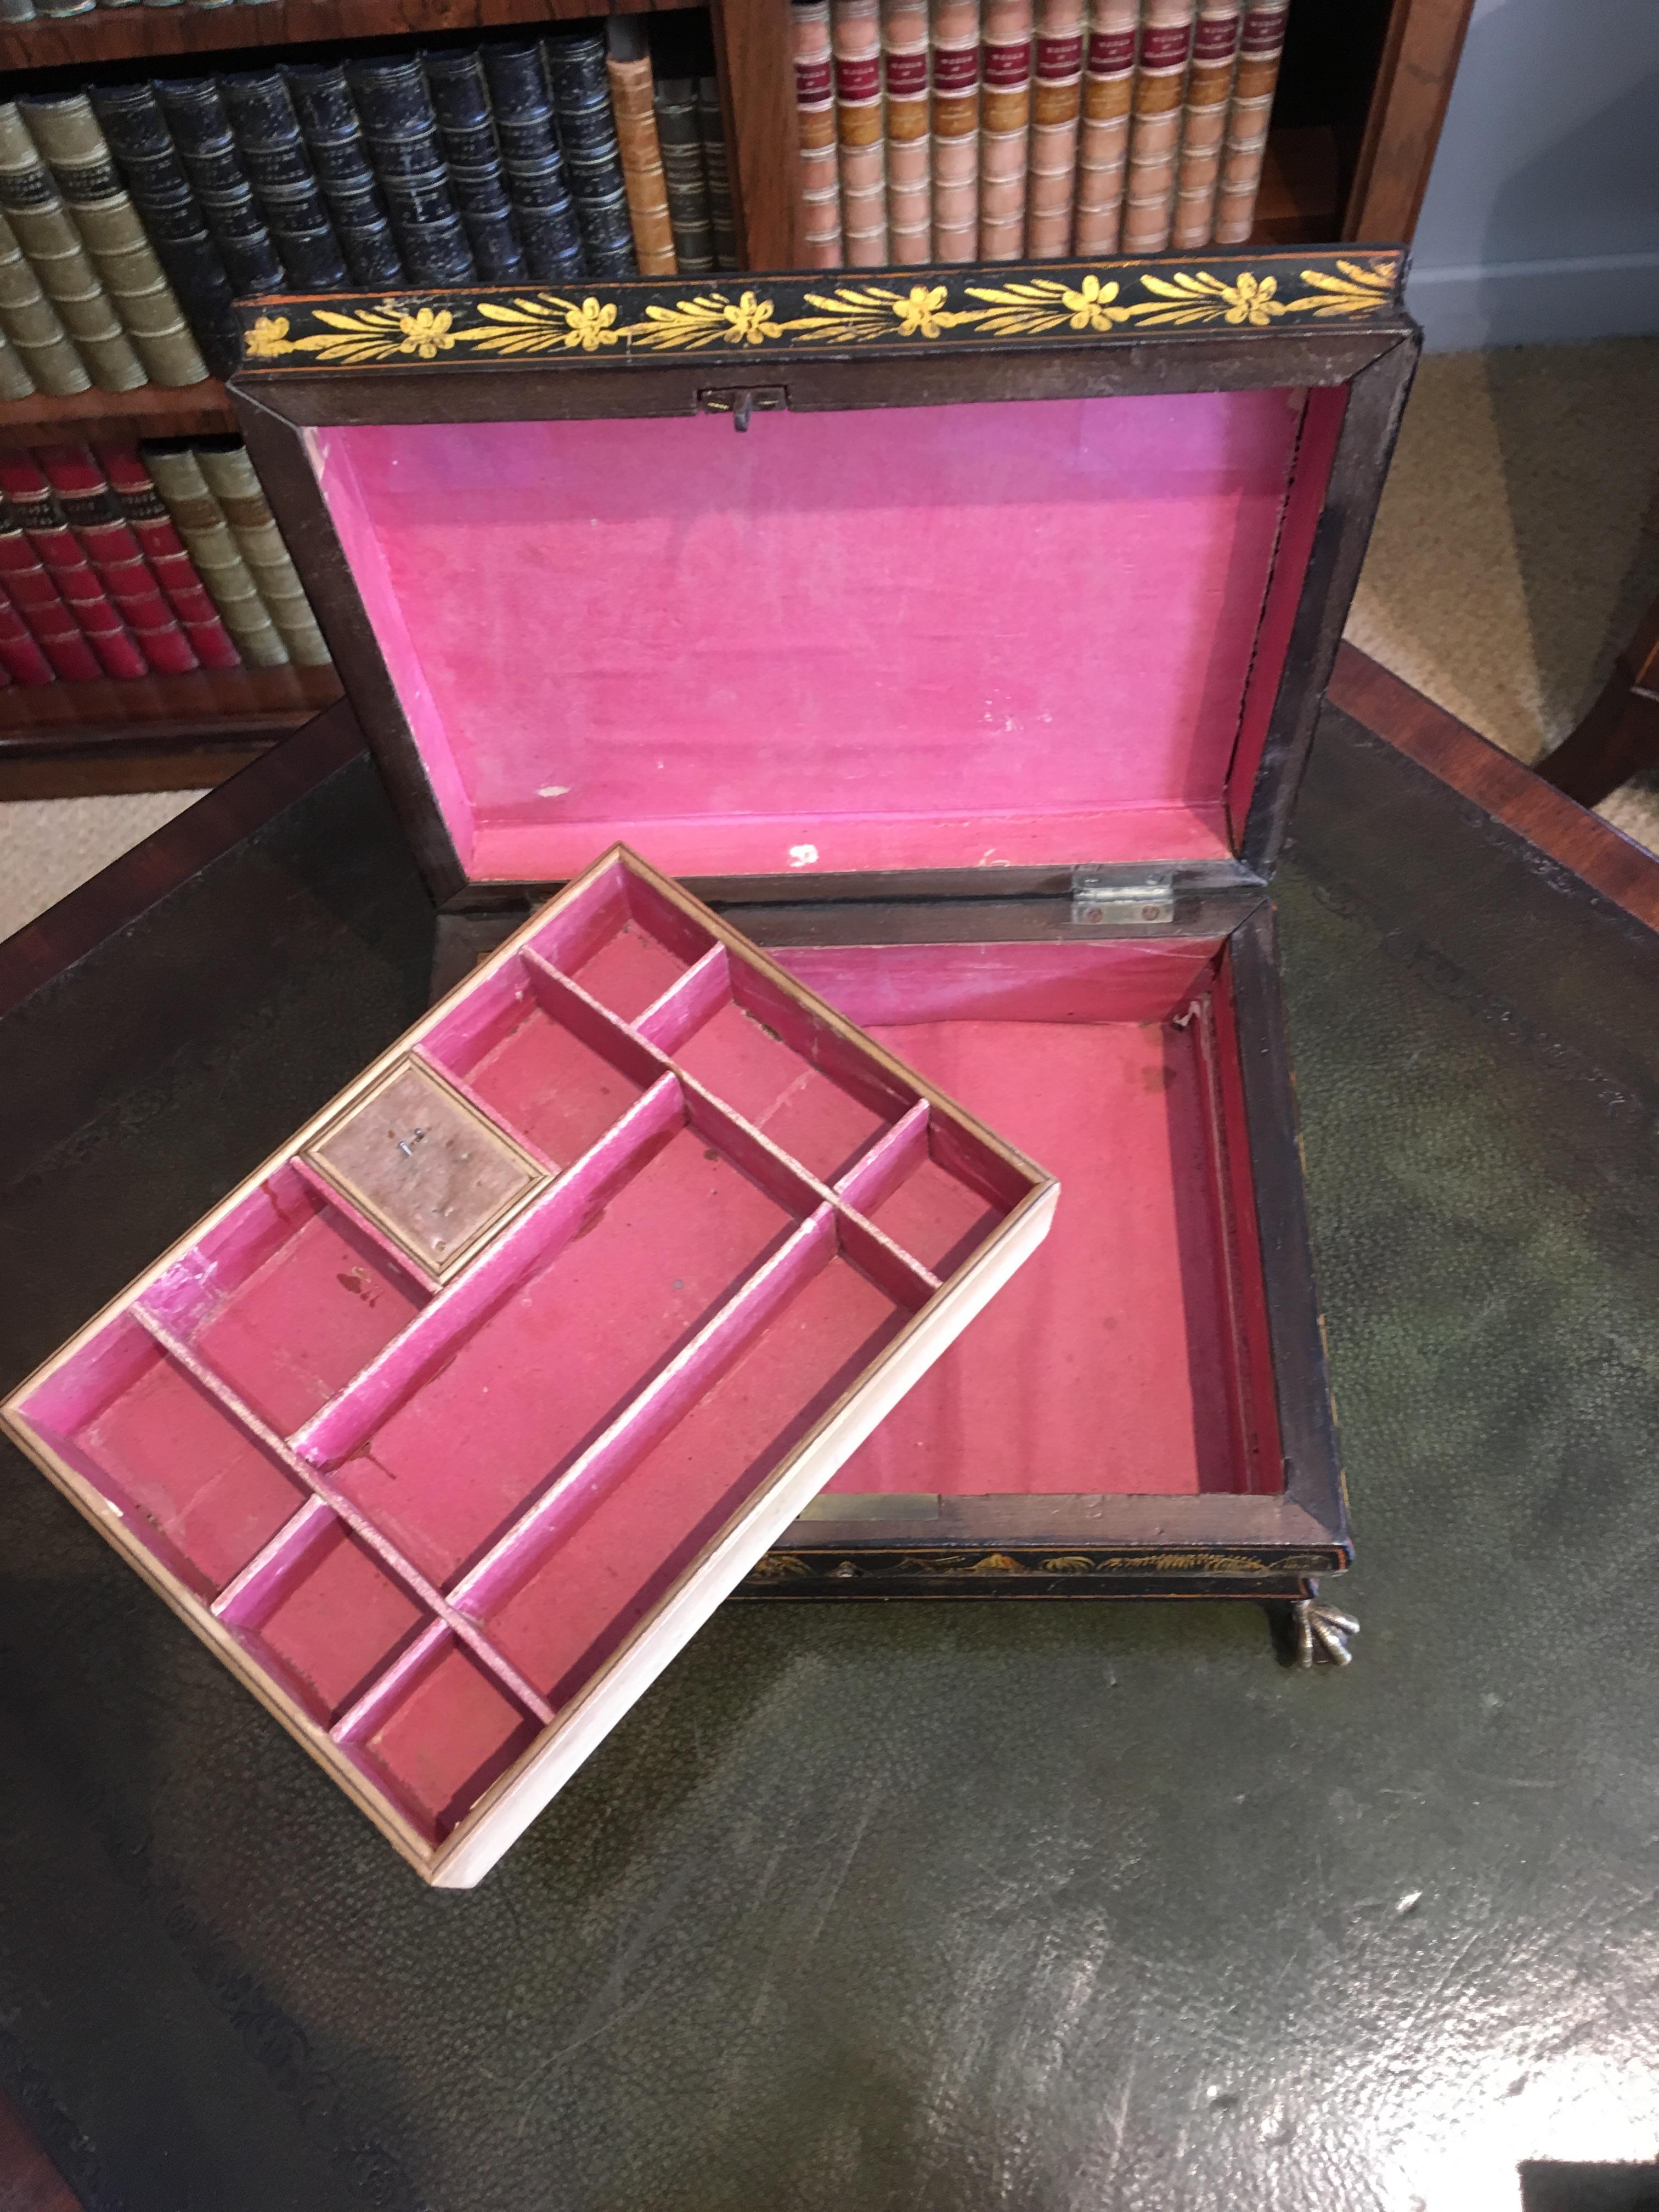 Early 19th Century Regency Period Japanned and Chinoiserie Lacquered Casket In Good Condition For Sale In Bradford on Avon, GB